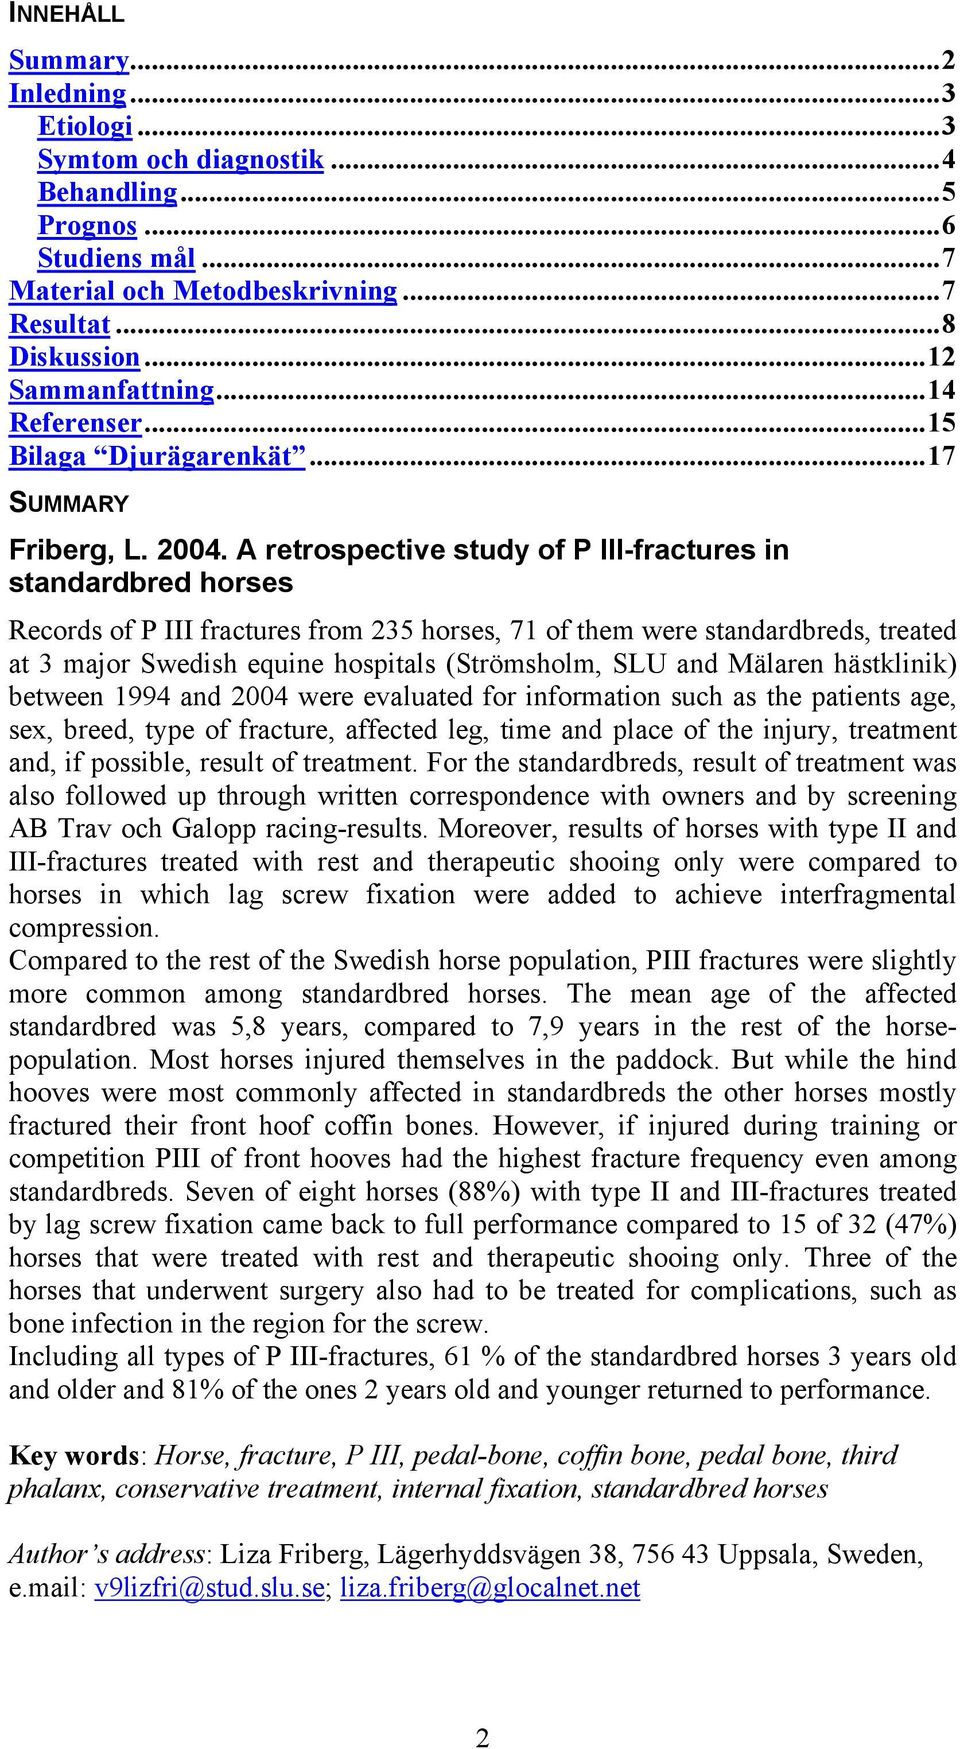 A retrospective study of P III-fractures in standardbred horses Records of P III fractures from 235 horses, 71 of them were standardbreds, treated at 3 major Swedish equine hospitals (Strömsholm, SLU